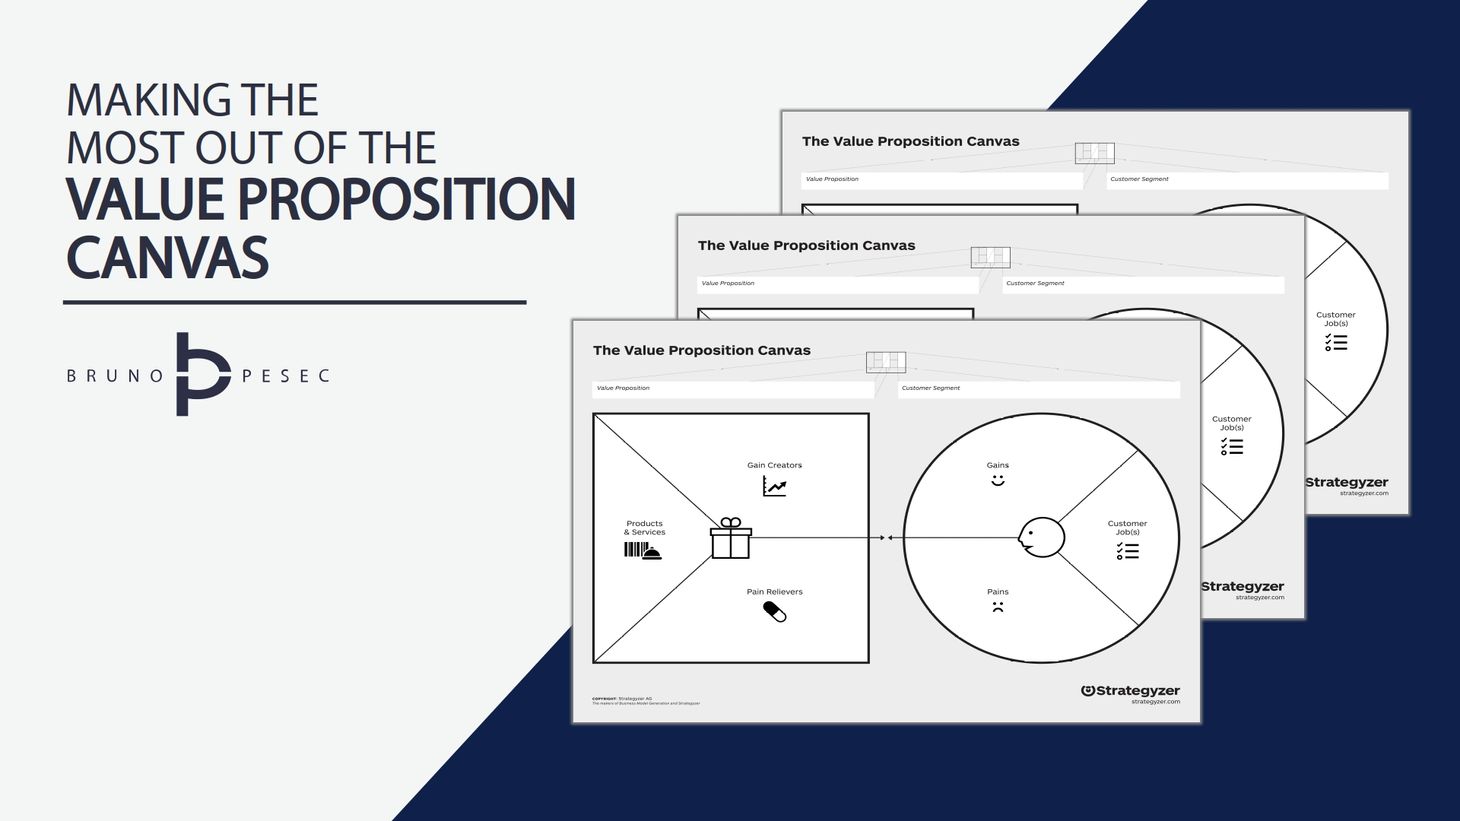 Making the most out of the Value Proposition Canvas